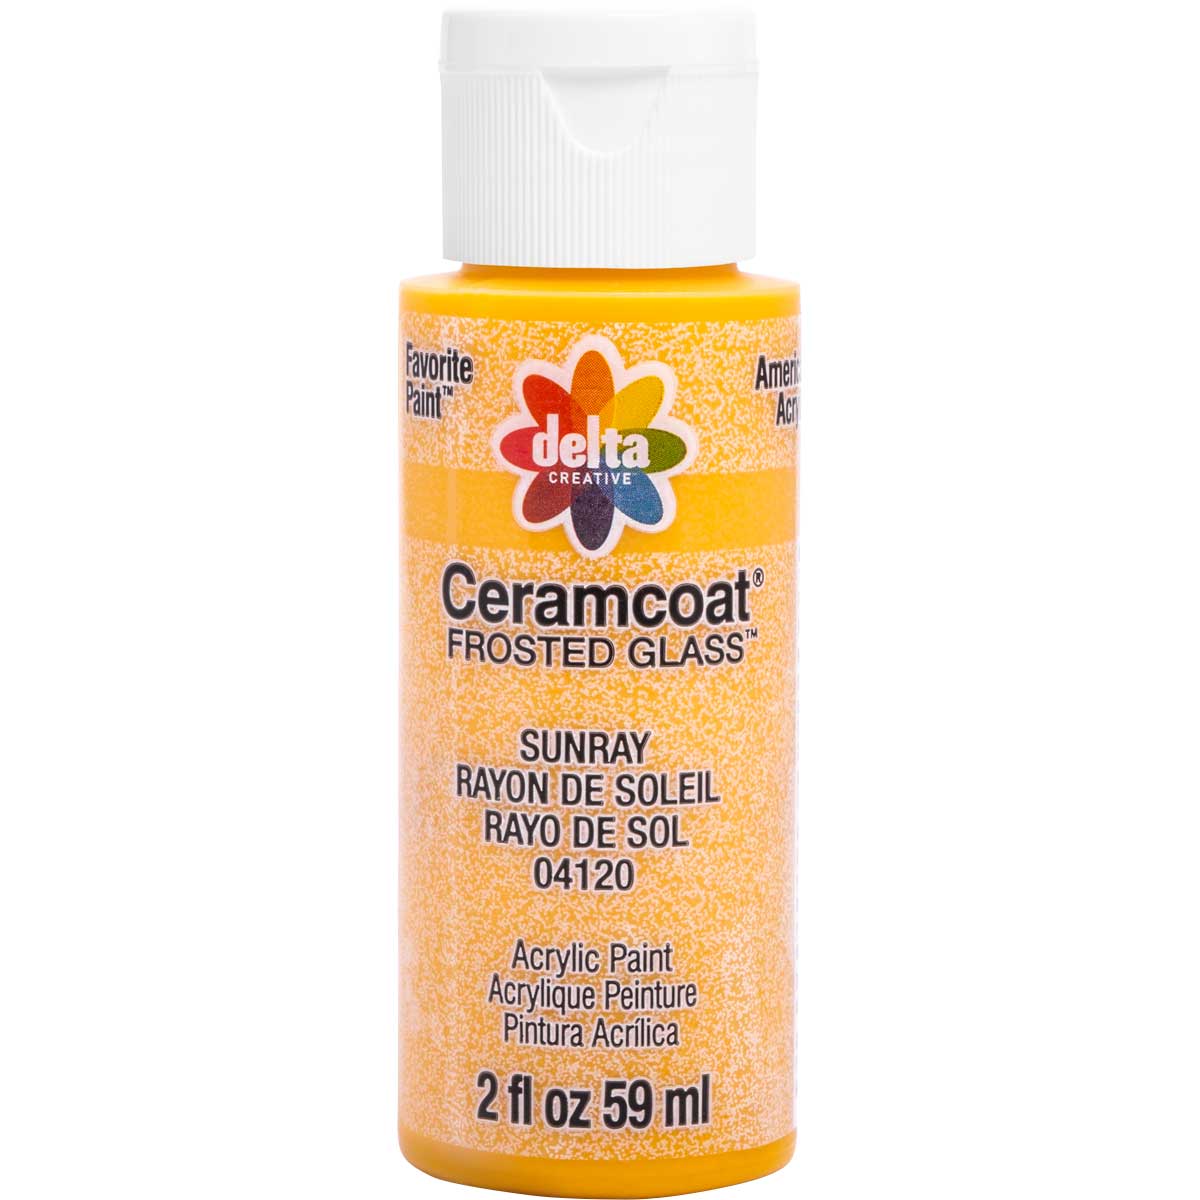 Delta Ceramcoat ® Frosted Glass Paint - Sunray, 2 oz. - 04120